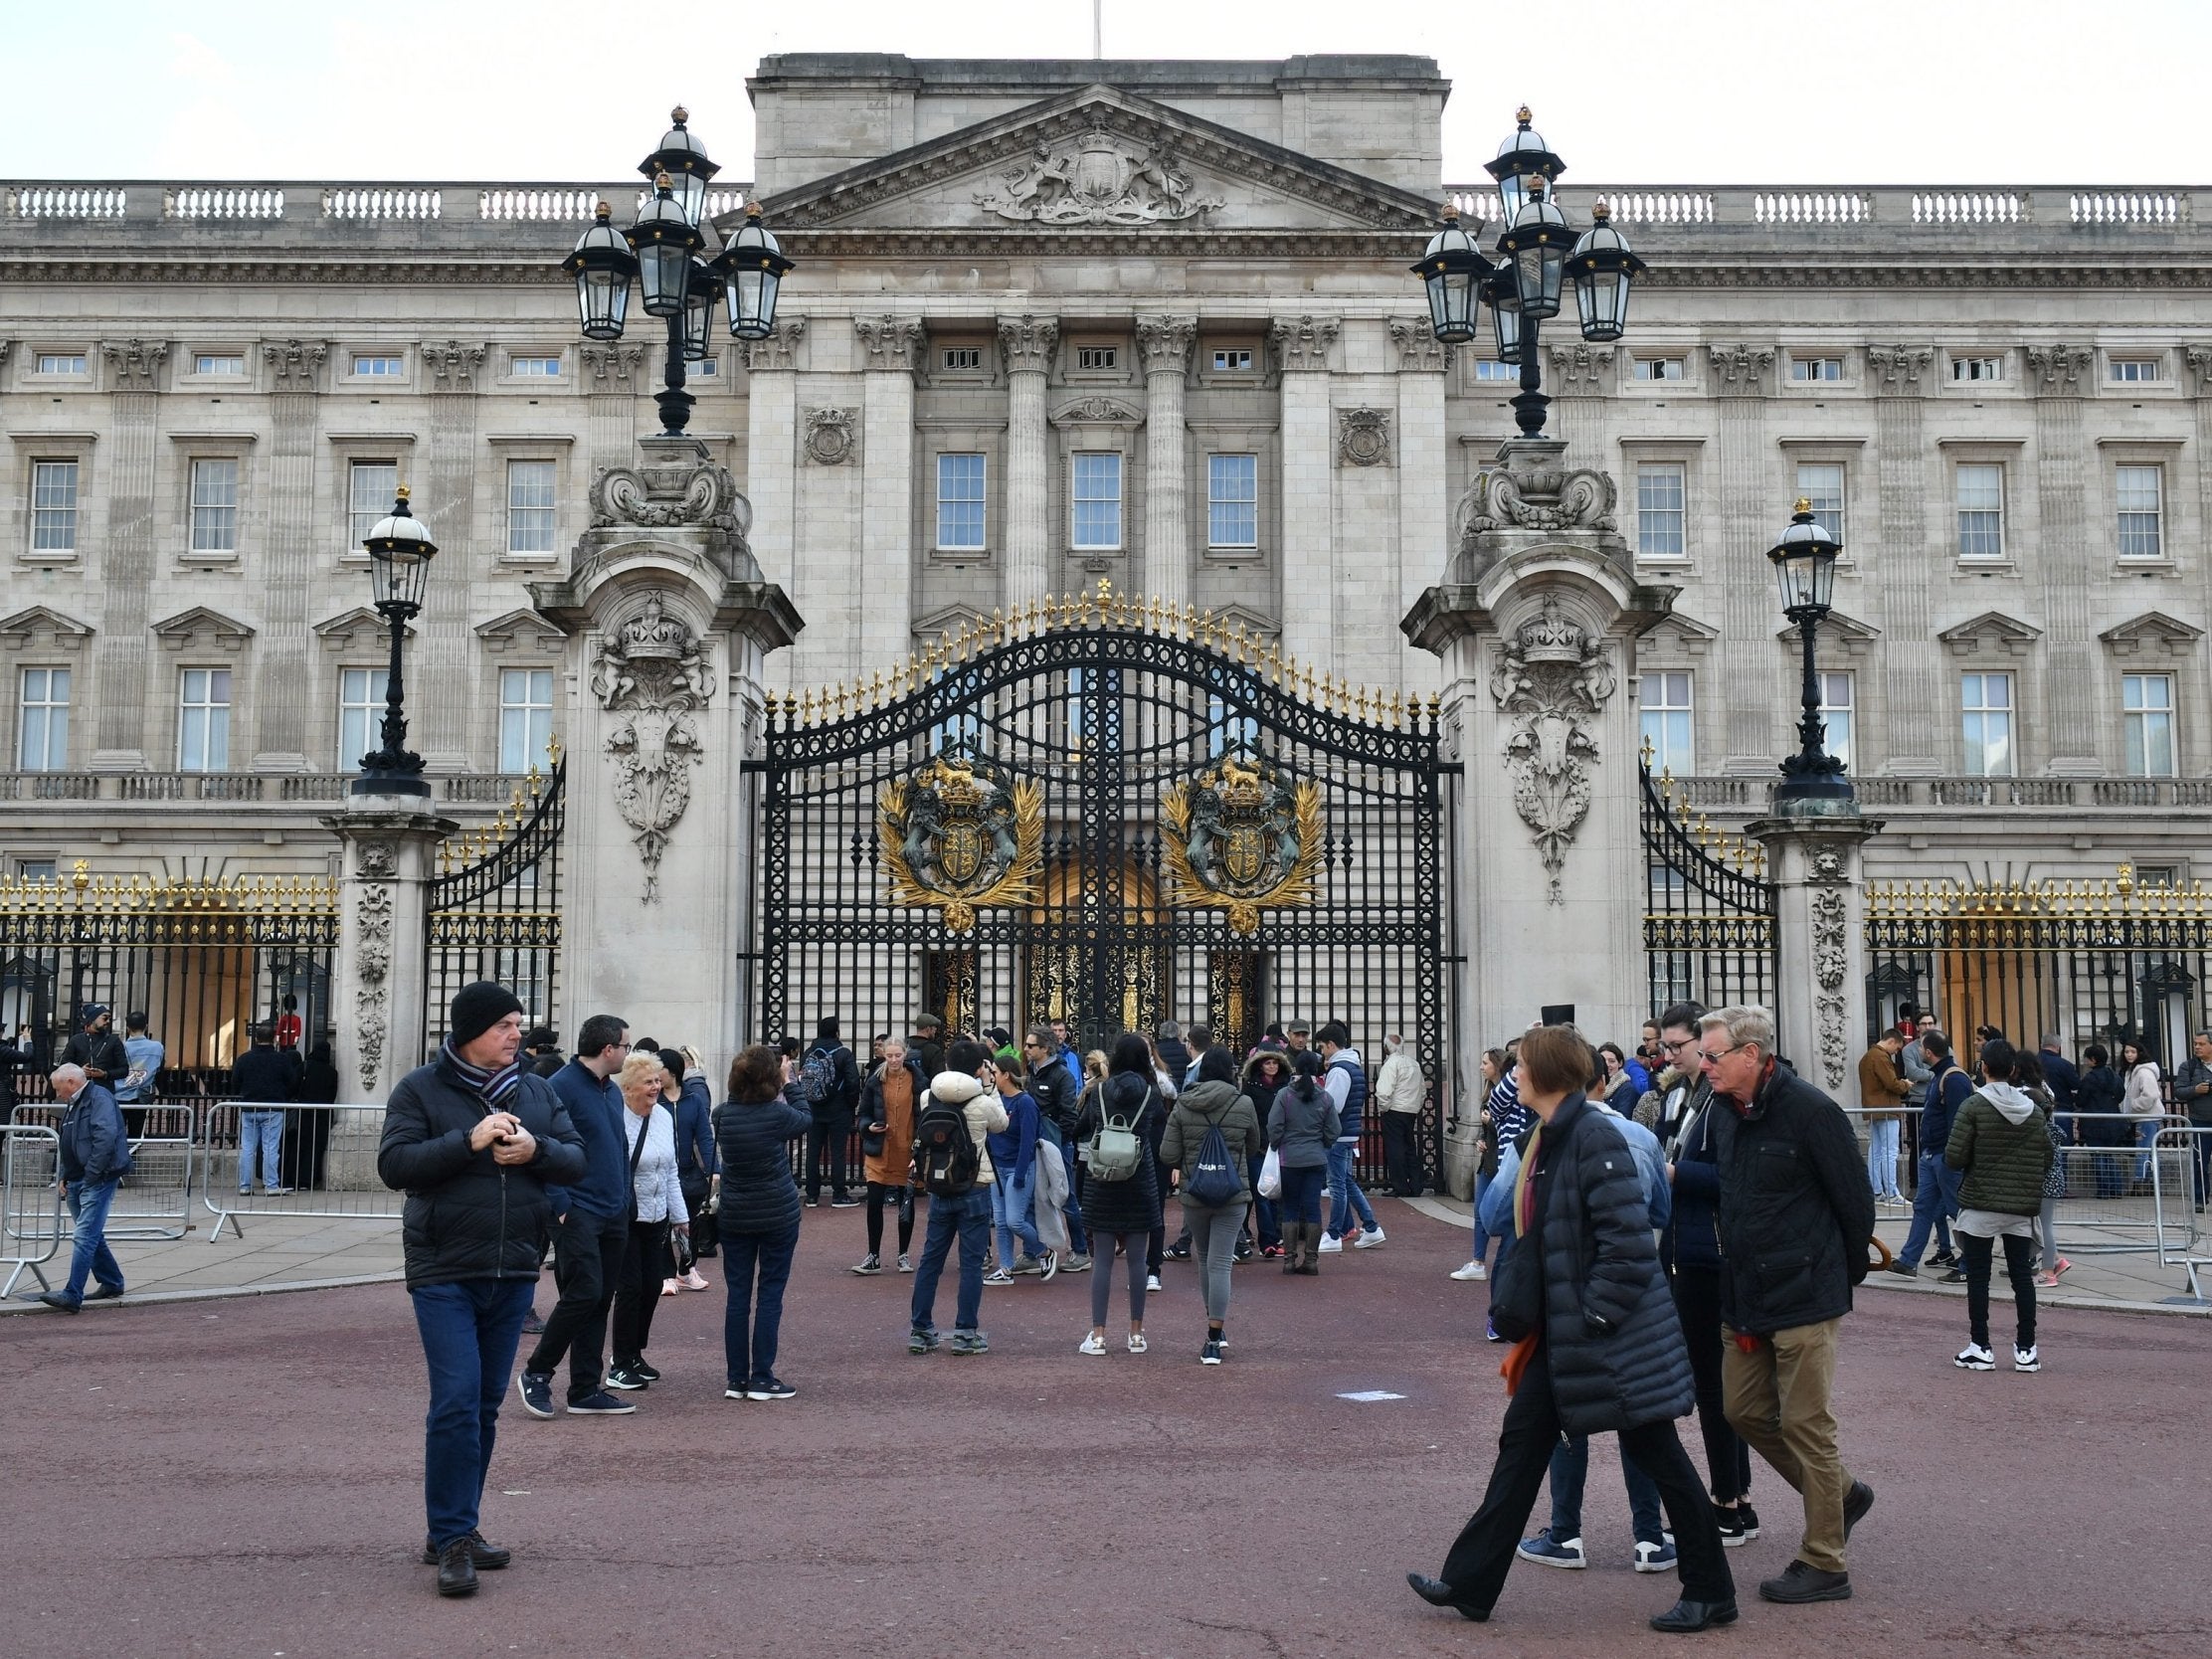 The officer was tasked with guarding Buckingham Palace